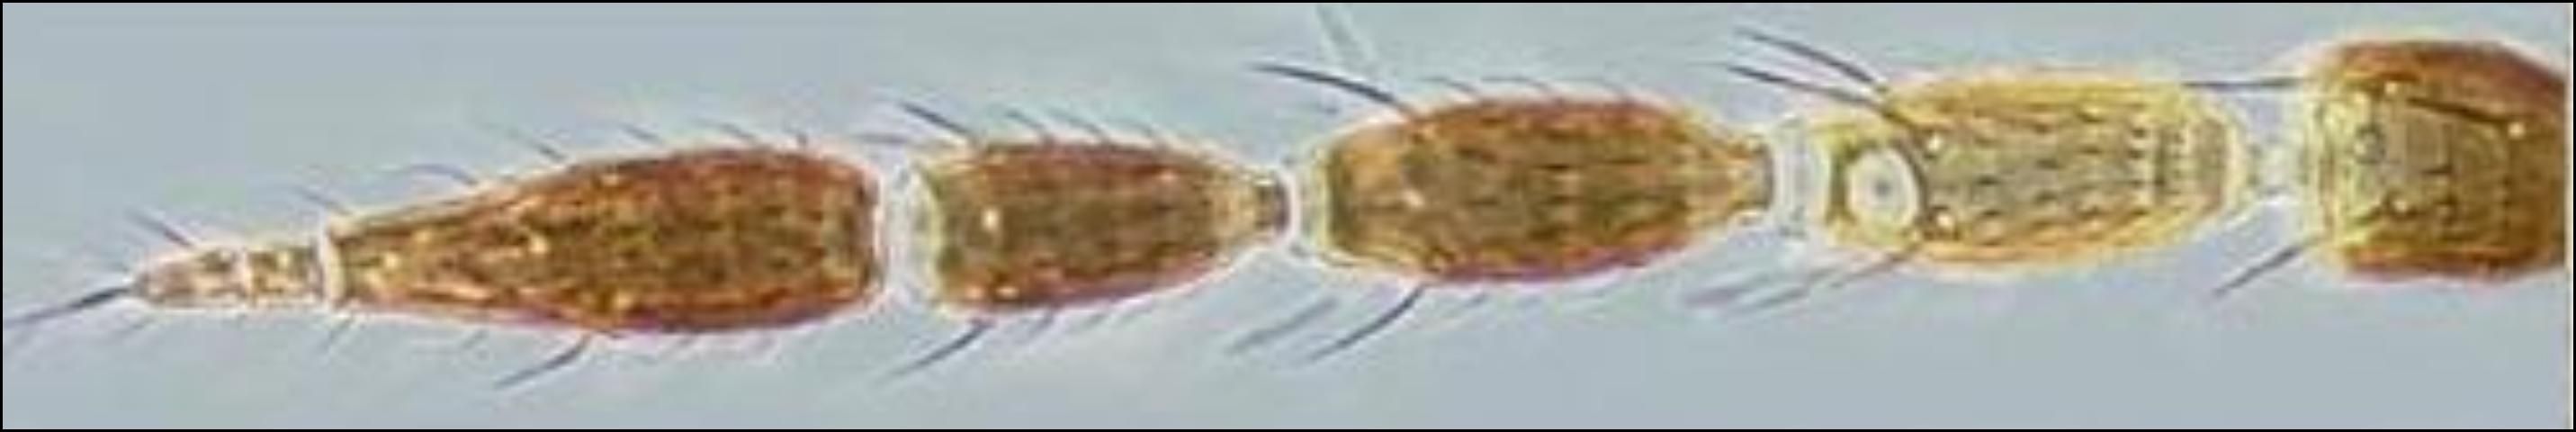 Figure 4. Antenna of the gladiolus thrips, Thrips simplex (Morison), showing the light brown segment.